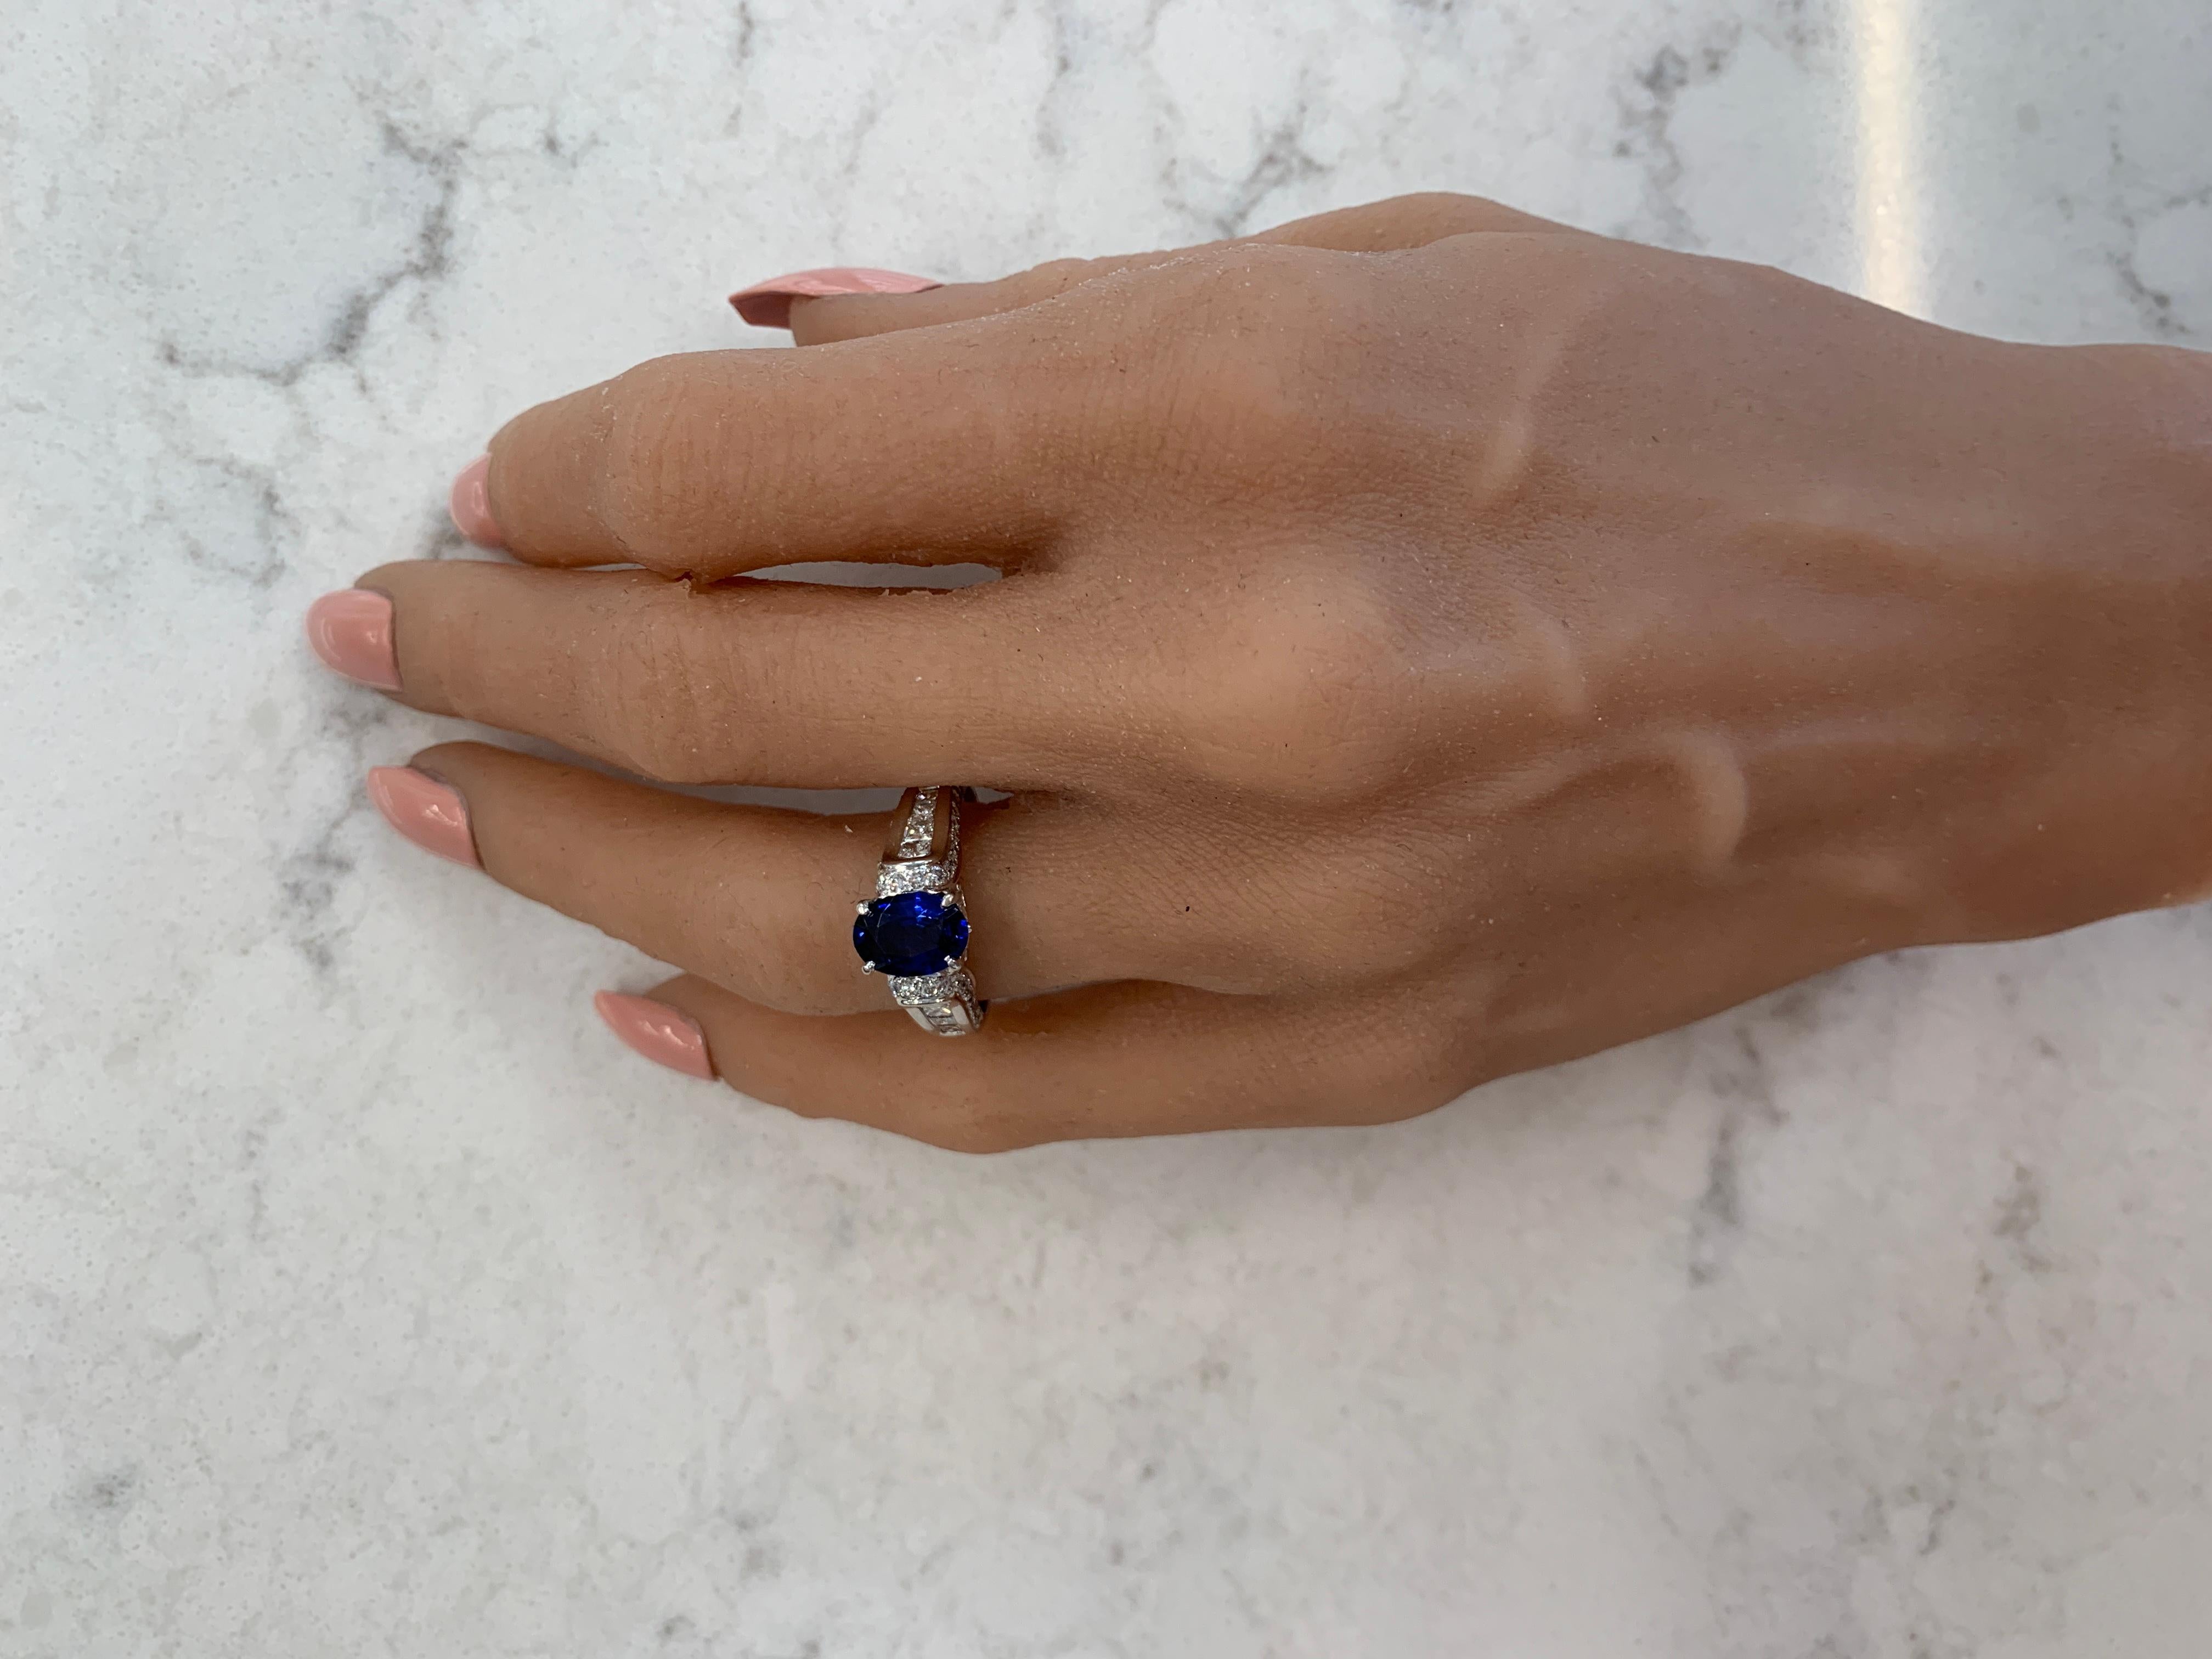 This is a 1.71 carat oval cut blue sapphire. The gem source is Sri Lanka; its color is royal blue and it is evenly distributed throughout the gem. Its luster and transparency is superb. Sparkling round brilliant cut diamonds total up to 1.11 carats.